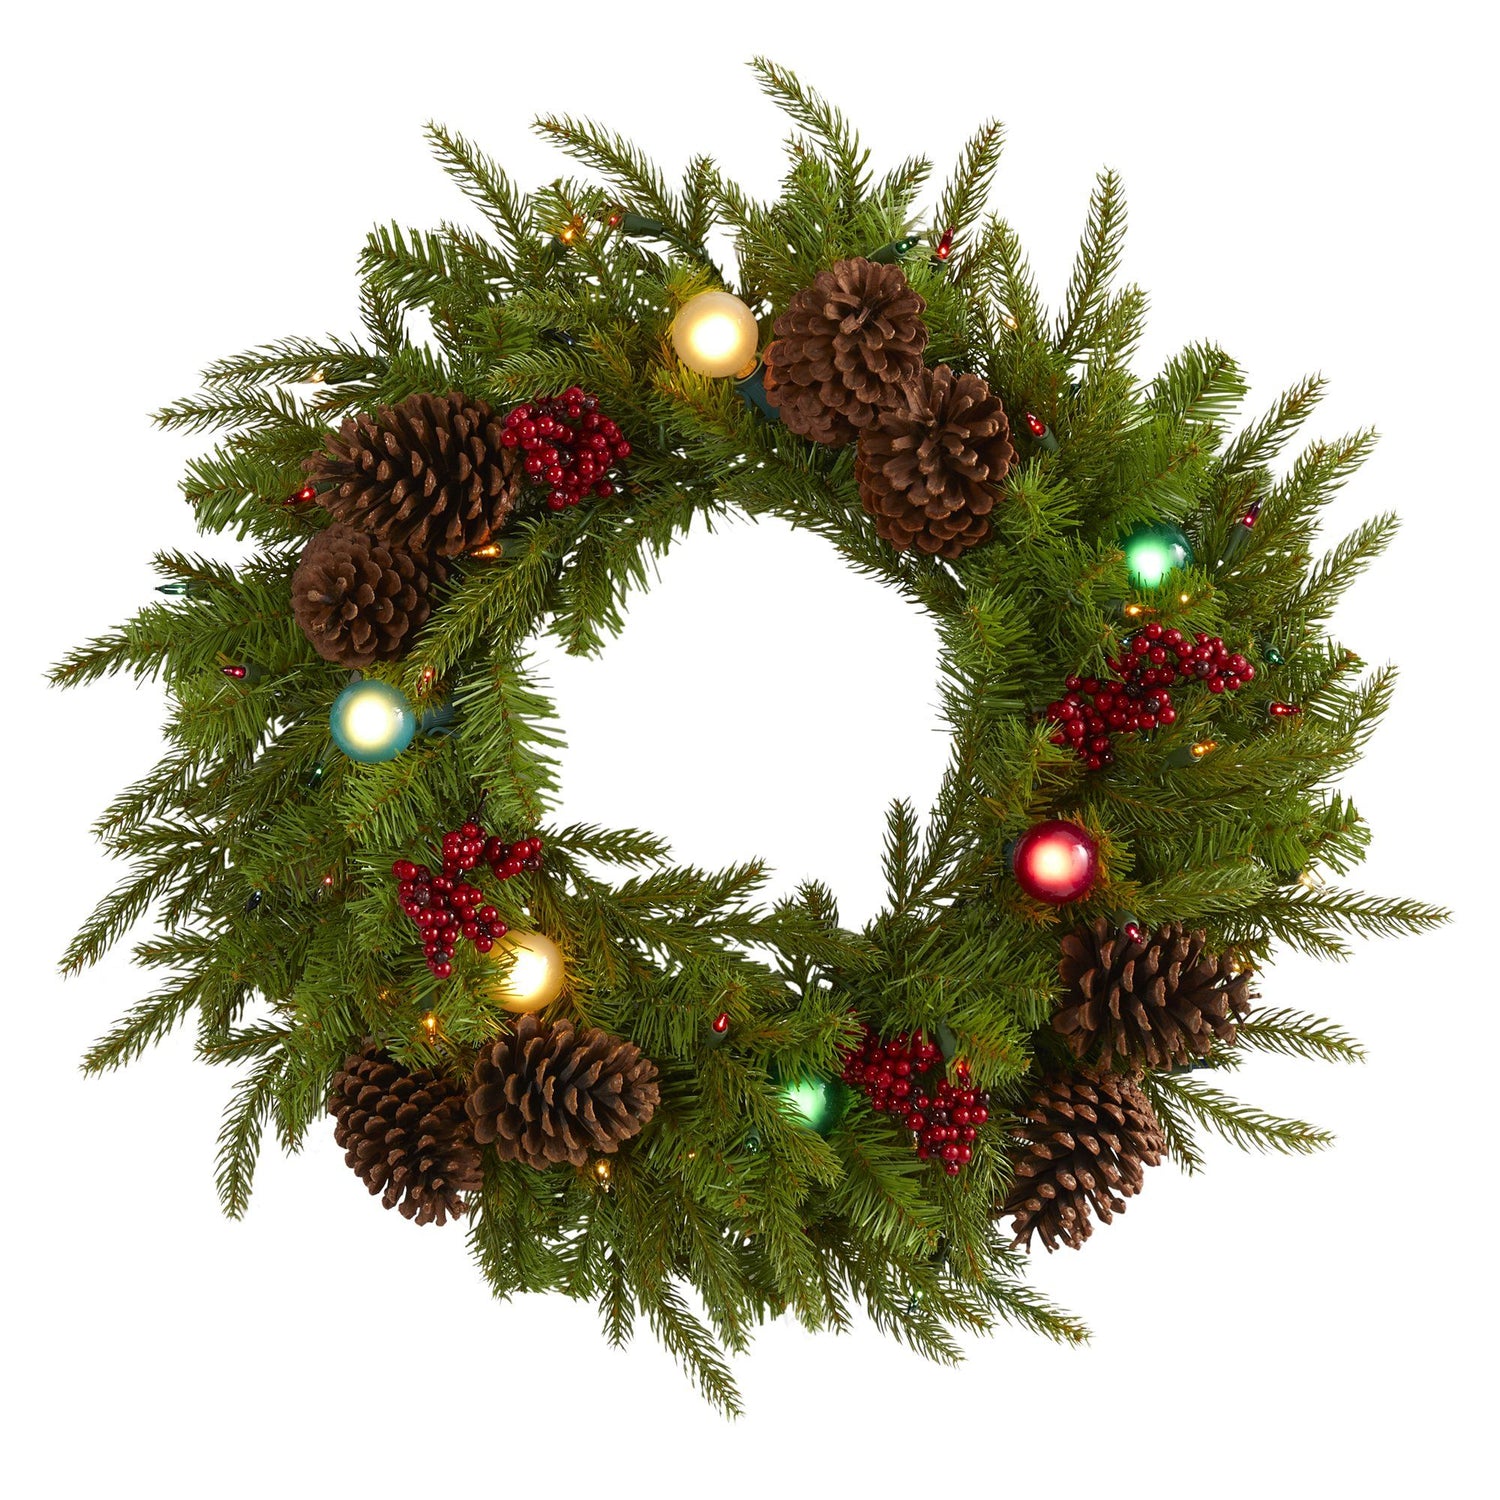 24” Christmas Artificial Wreath with 50 Multicolored Lights, 7 Multicolored Globe Bulbs, Berries and Pine Cones